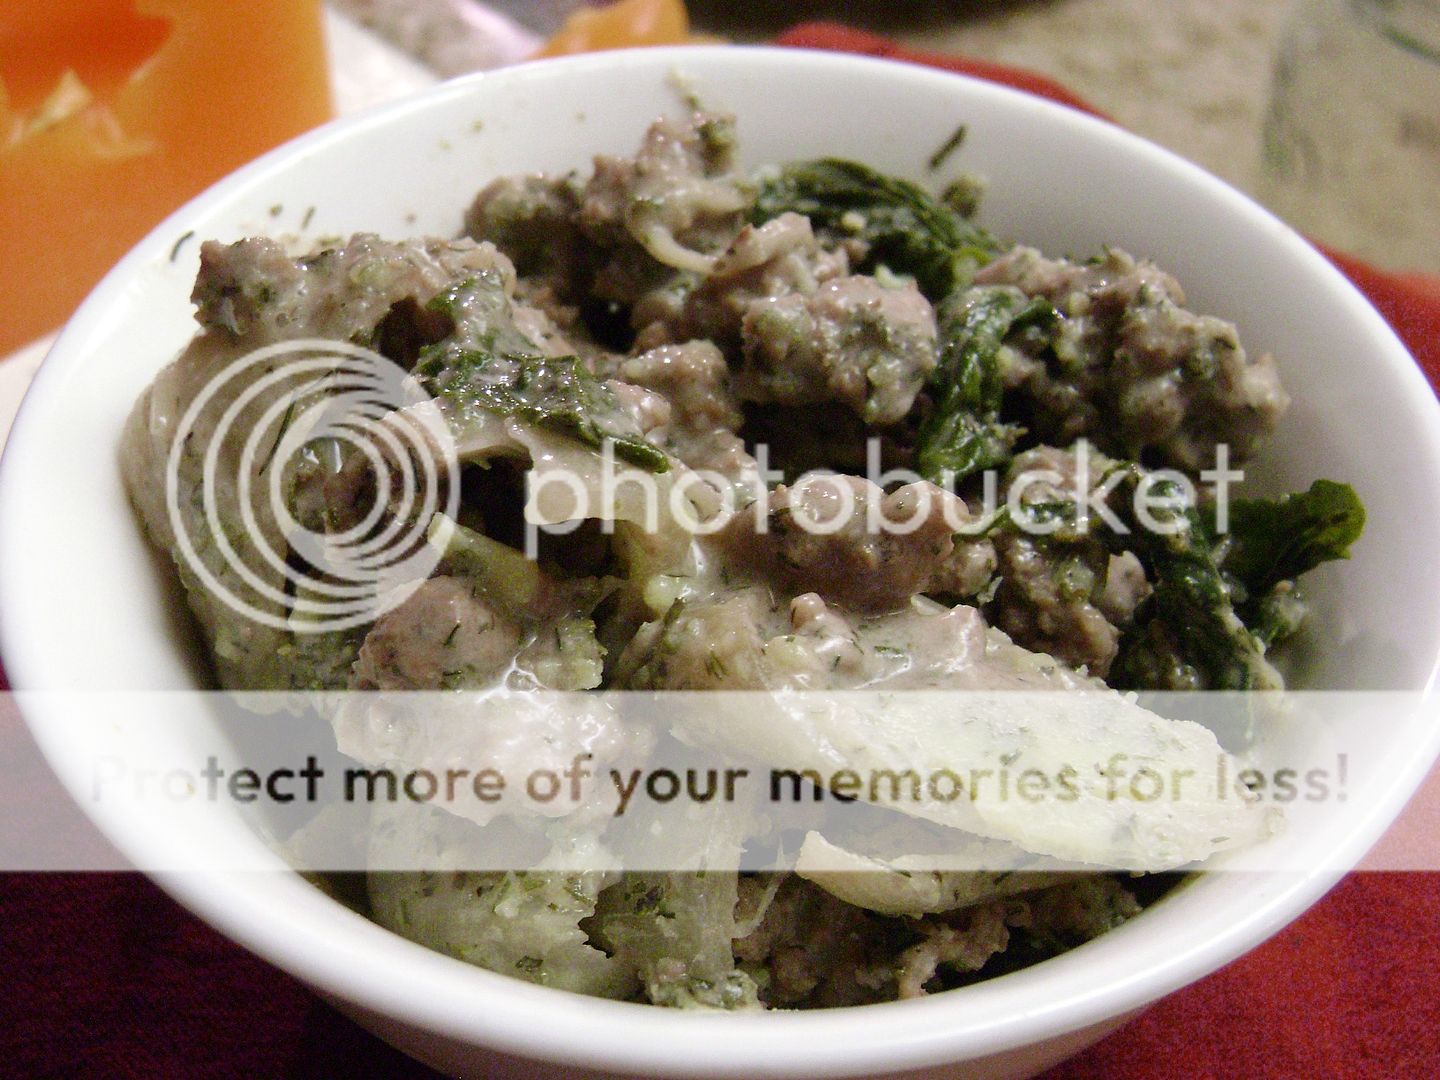 Grass-fed/finished ground beef, onion, chard and fresh mint and dill in a primal coconut-based tzatziki-like sauce